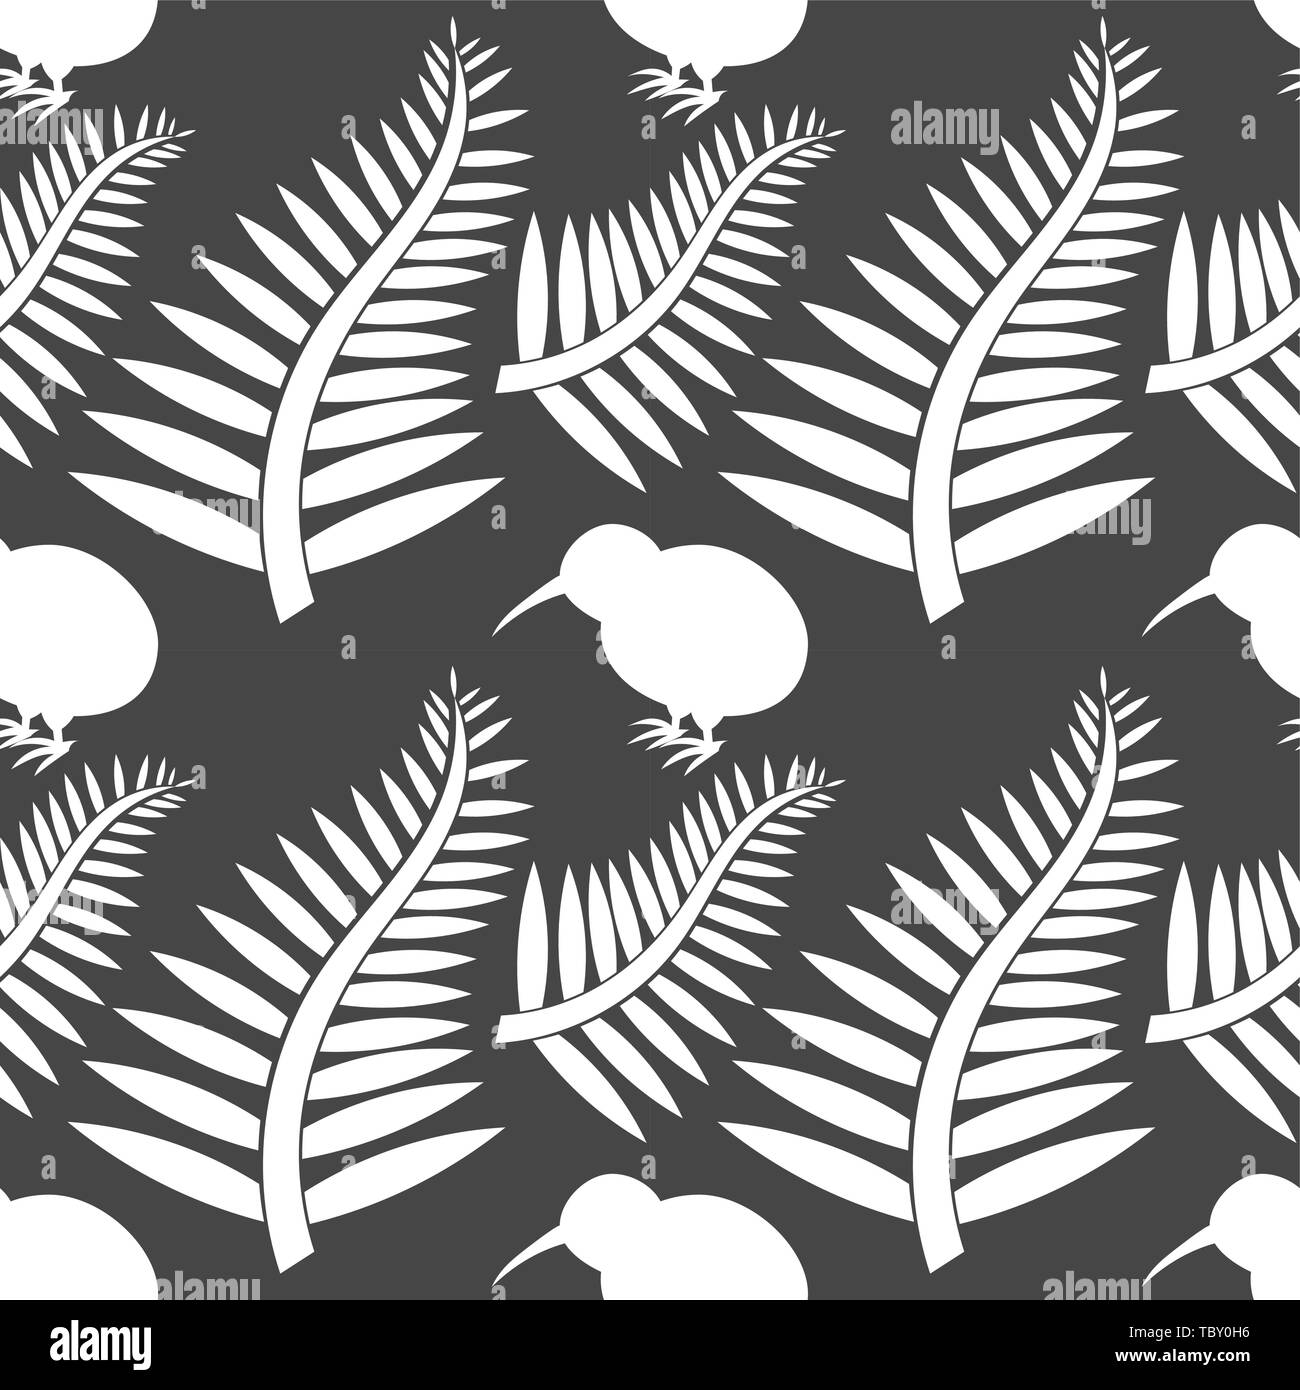 Black Ferns New Zealand High Resolution Stock Photography and Images - Alamy